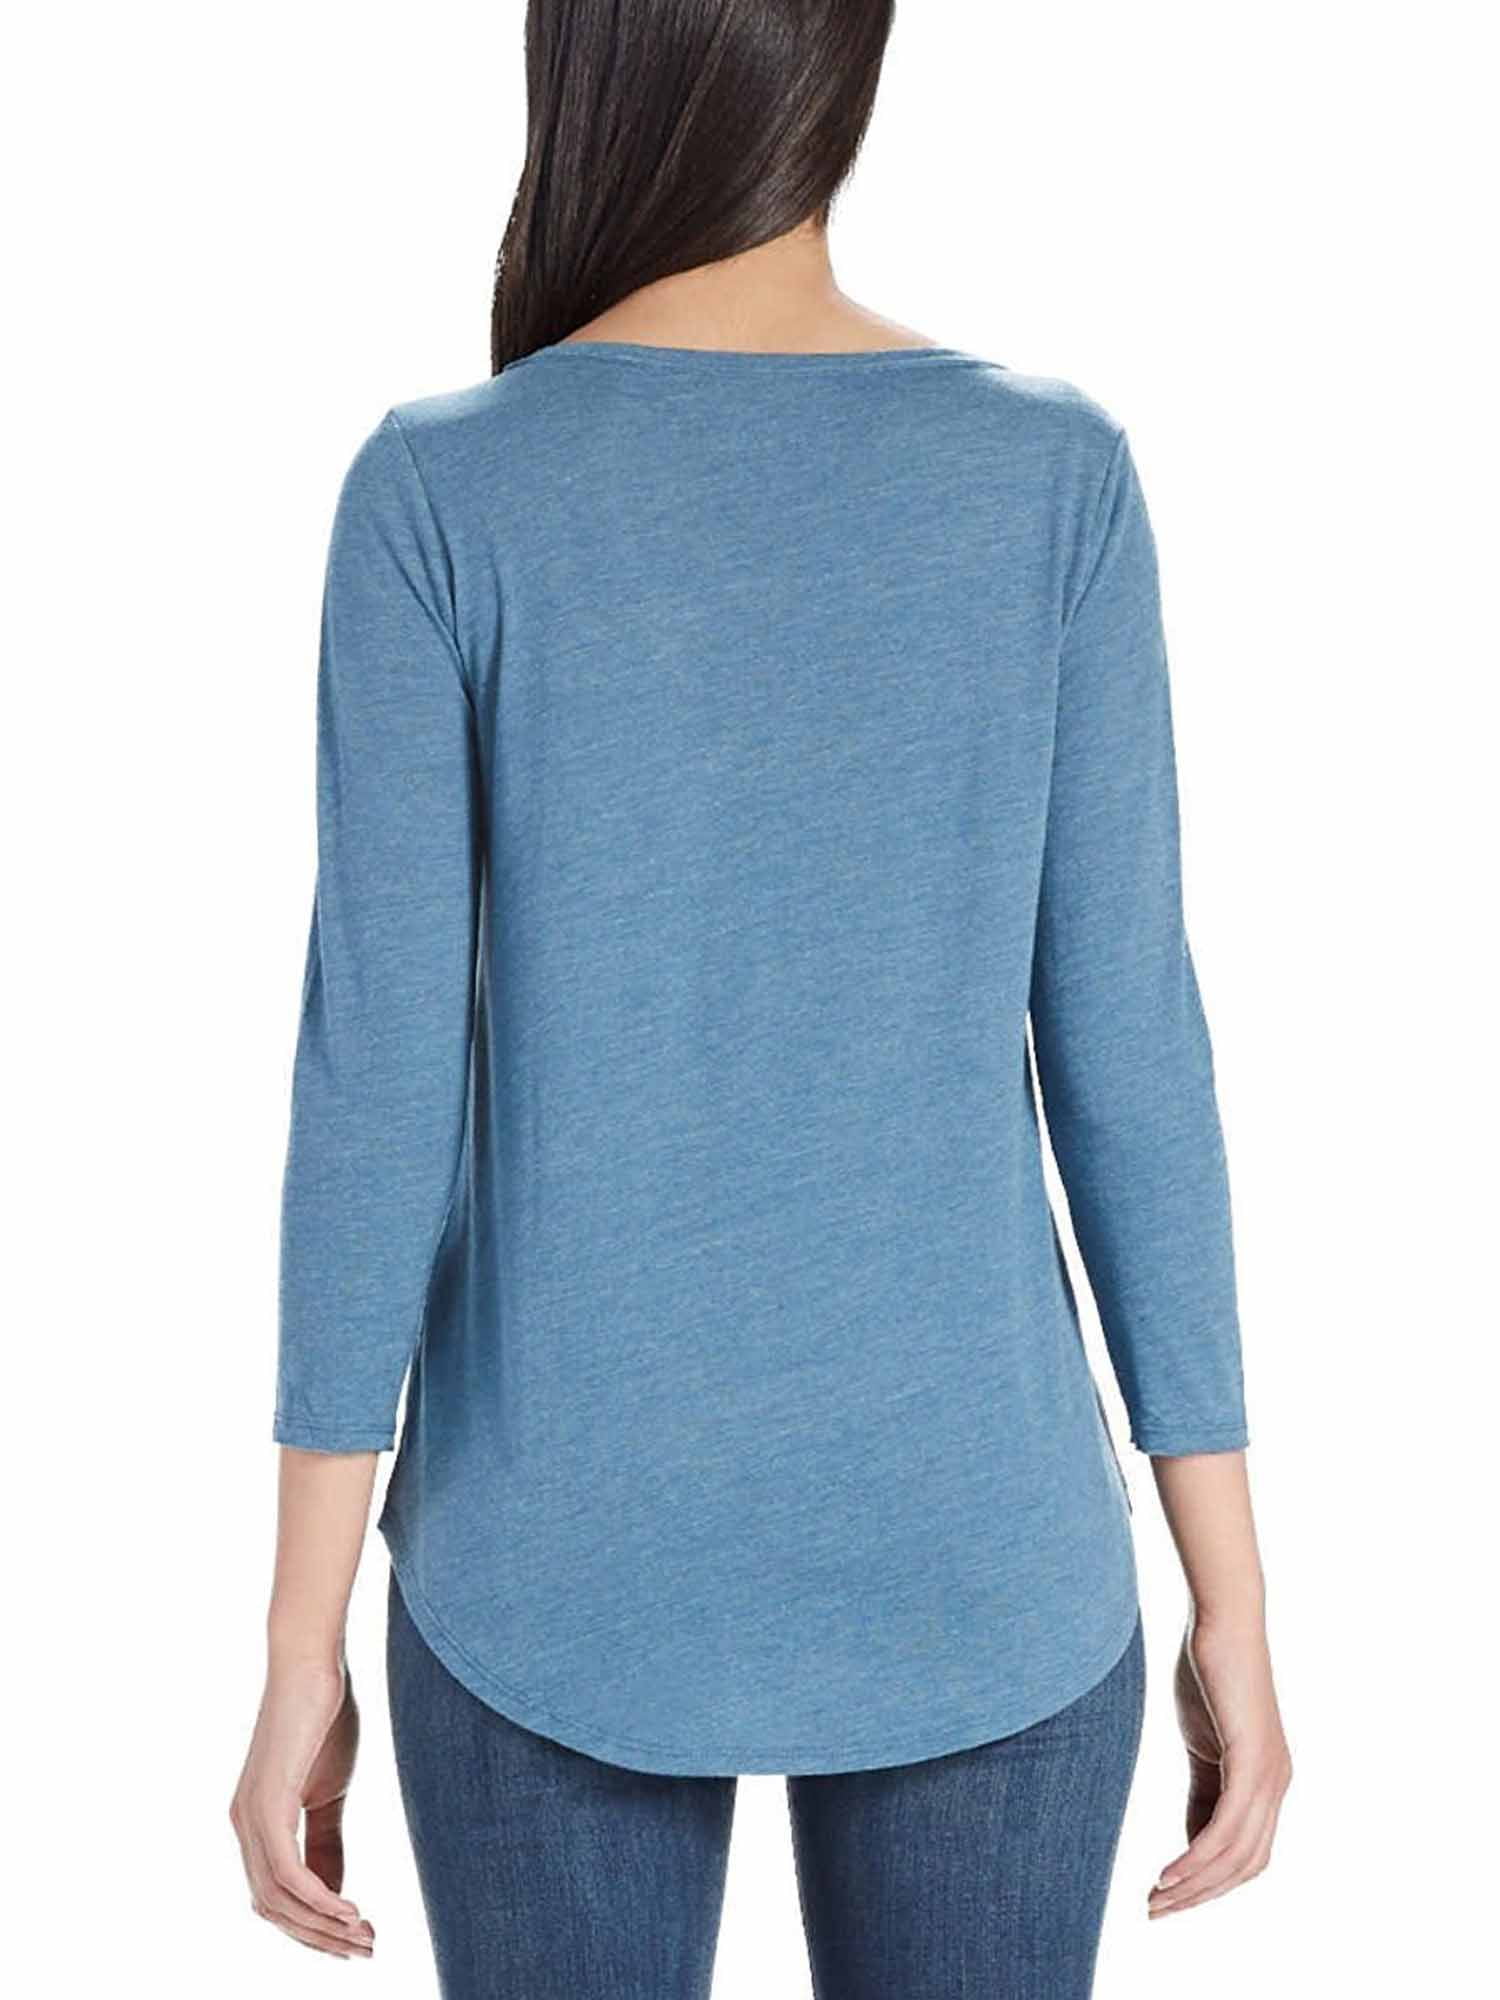 Lucky Brand Women's 3/4 Sleeve Scoop Neck Graphic Tee Shirt (Peacock,  XX-Large)